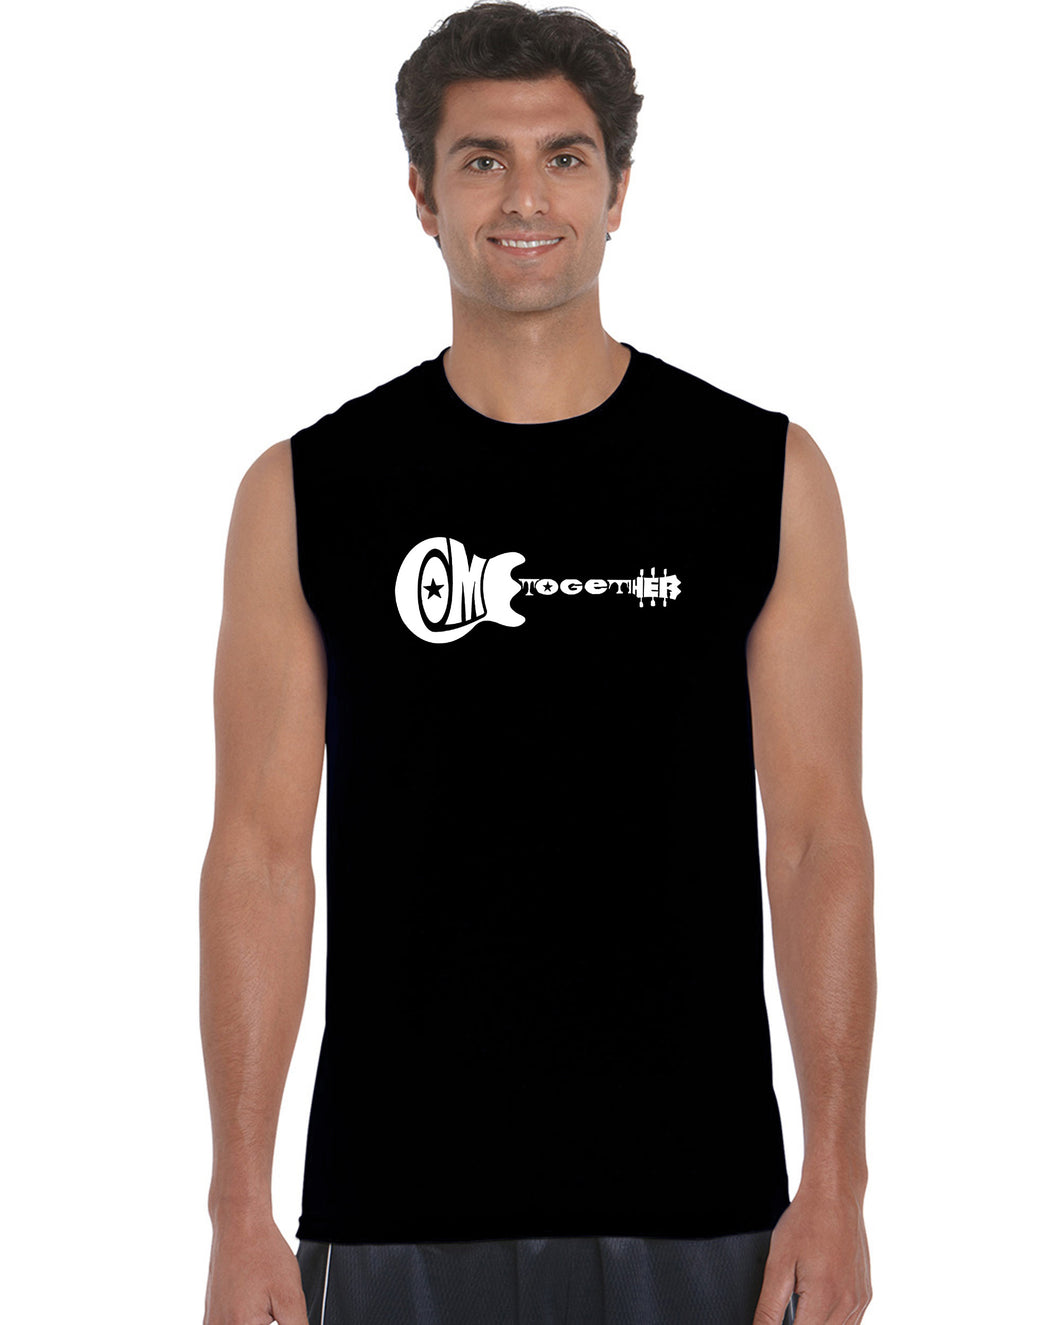 COME TOGETHER - Men's Word Art Sleeveless T-Shirt